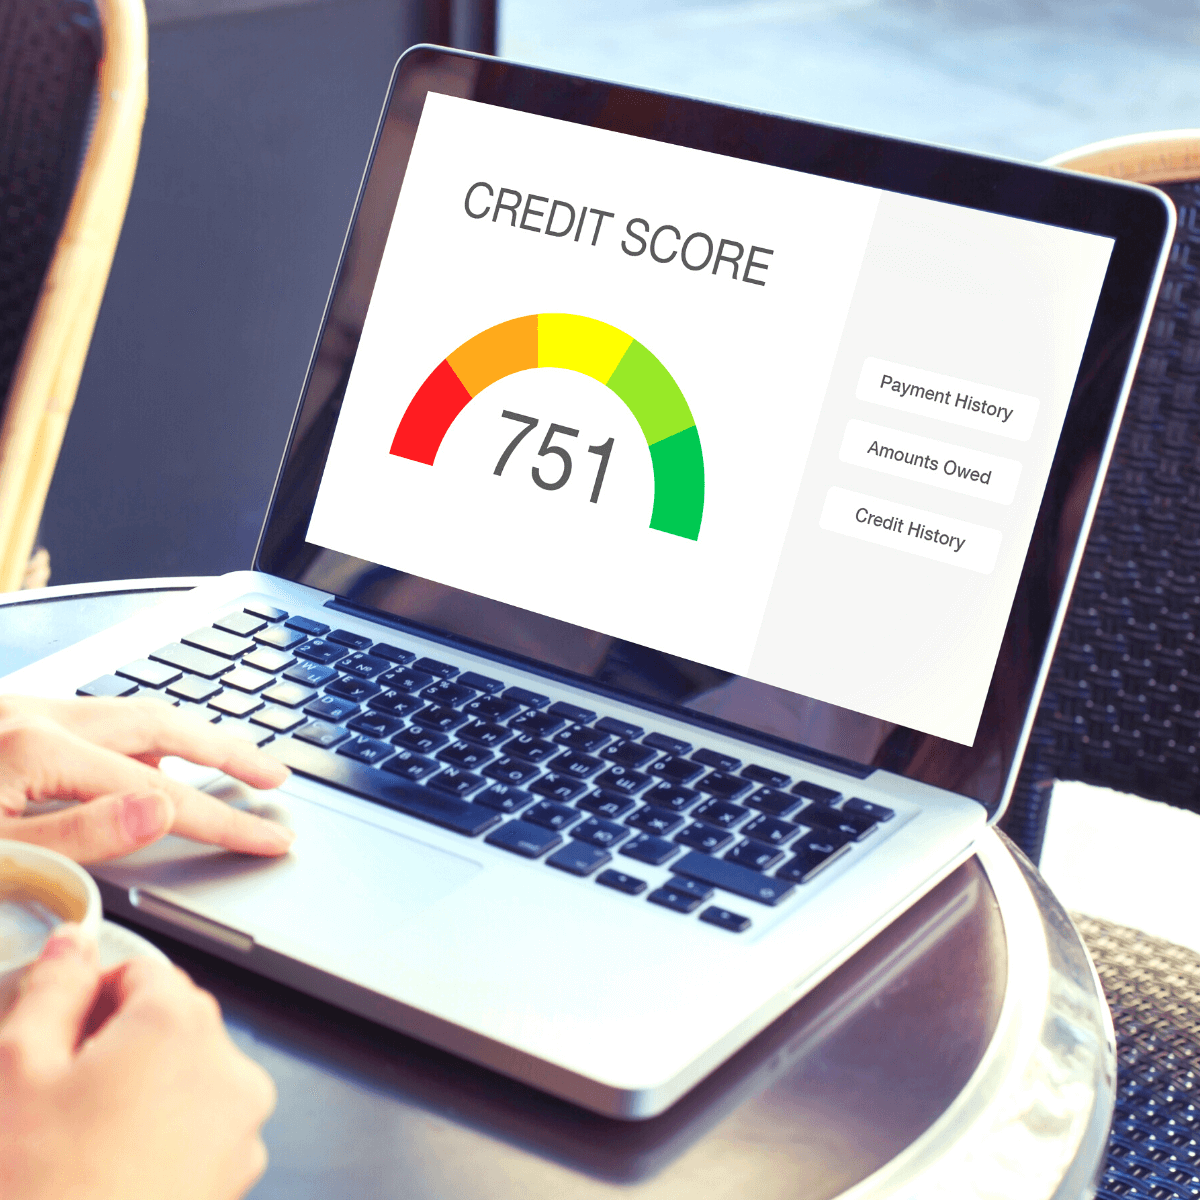 Are Free Credit Scores The Real Deal?